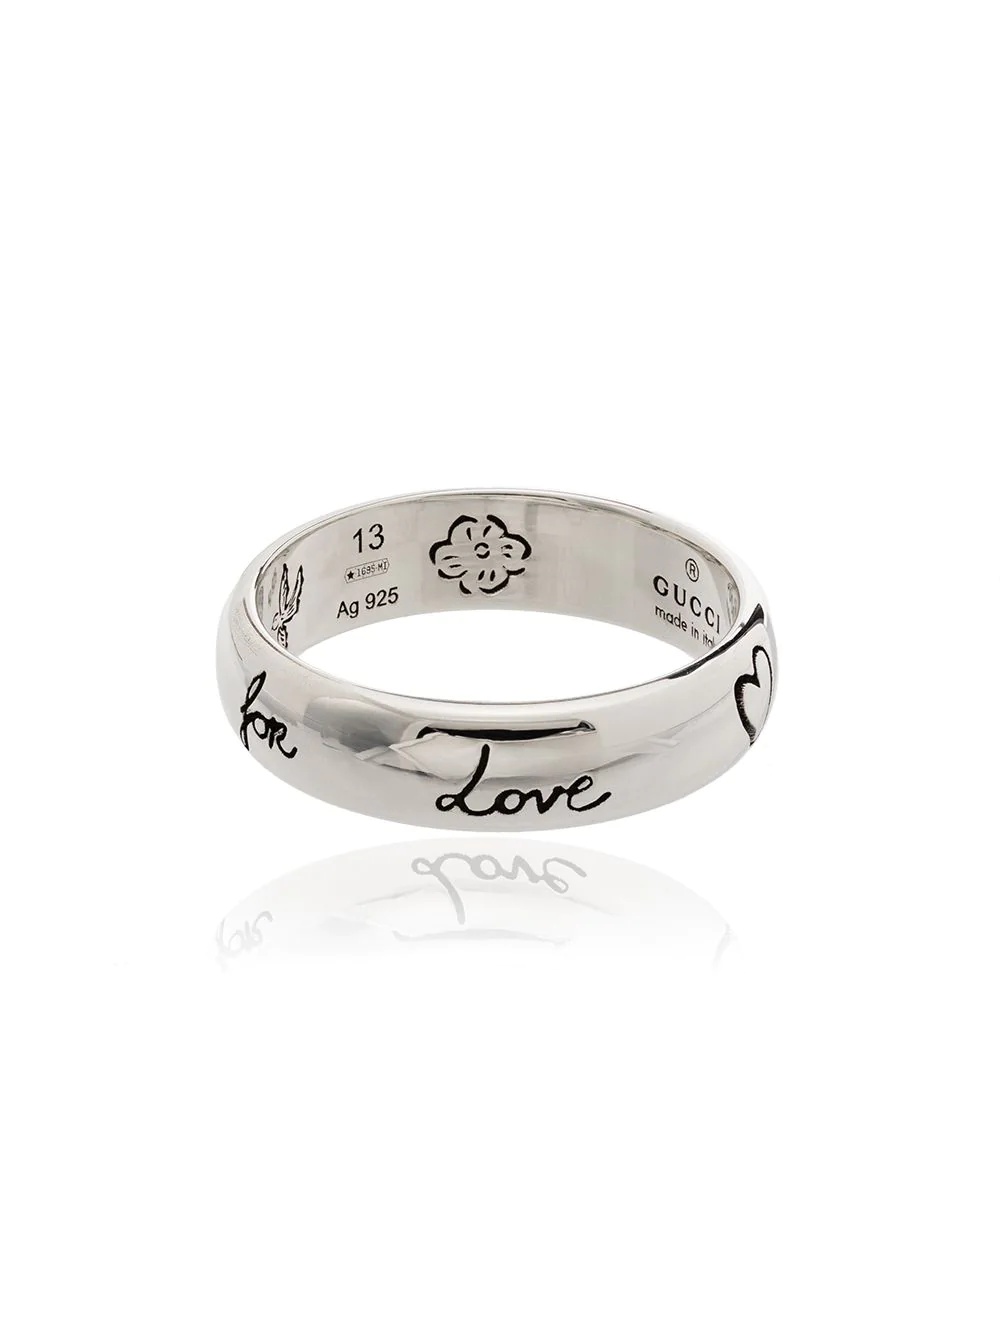 Blind For Love band ring - 1